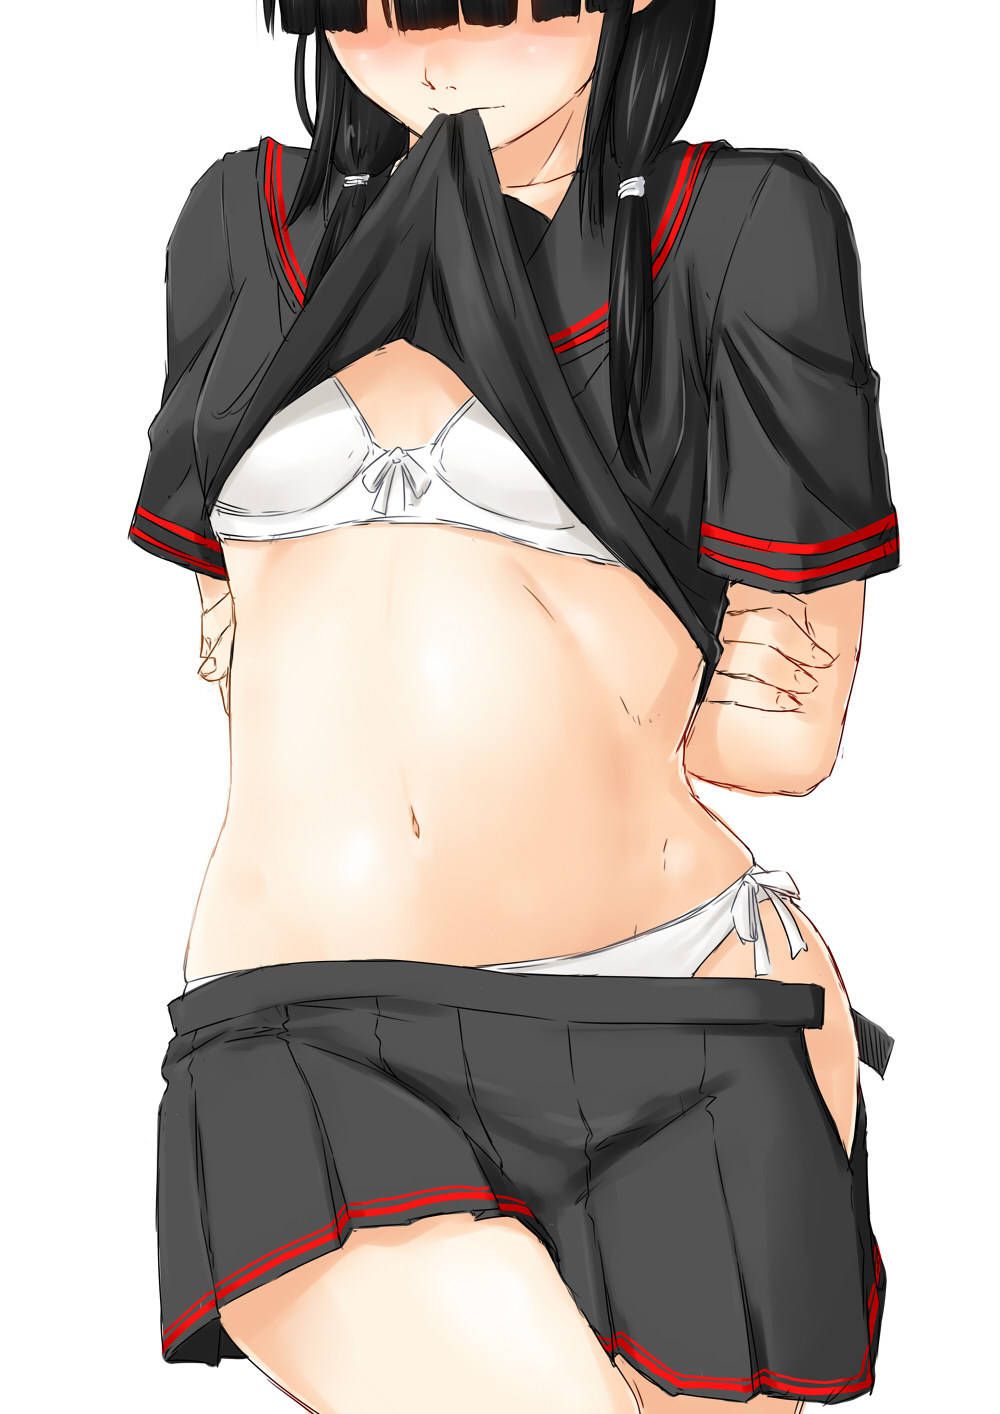 The second erotic image of erotic girl who has a sailor suit and pants and has more eh expression 4